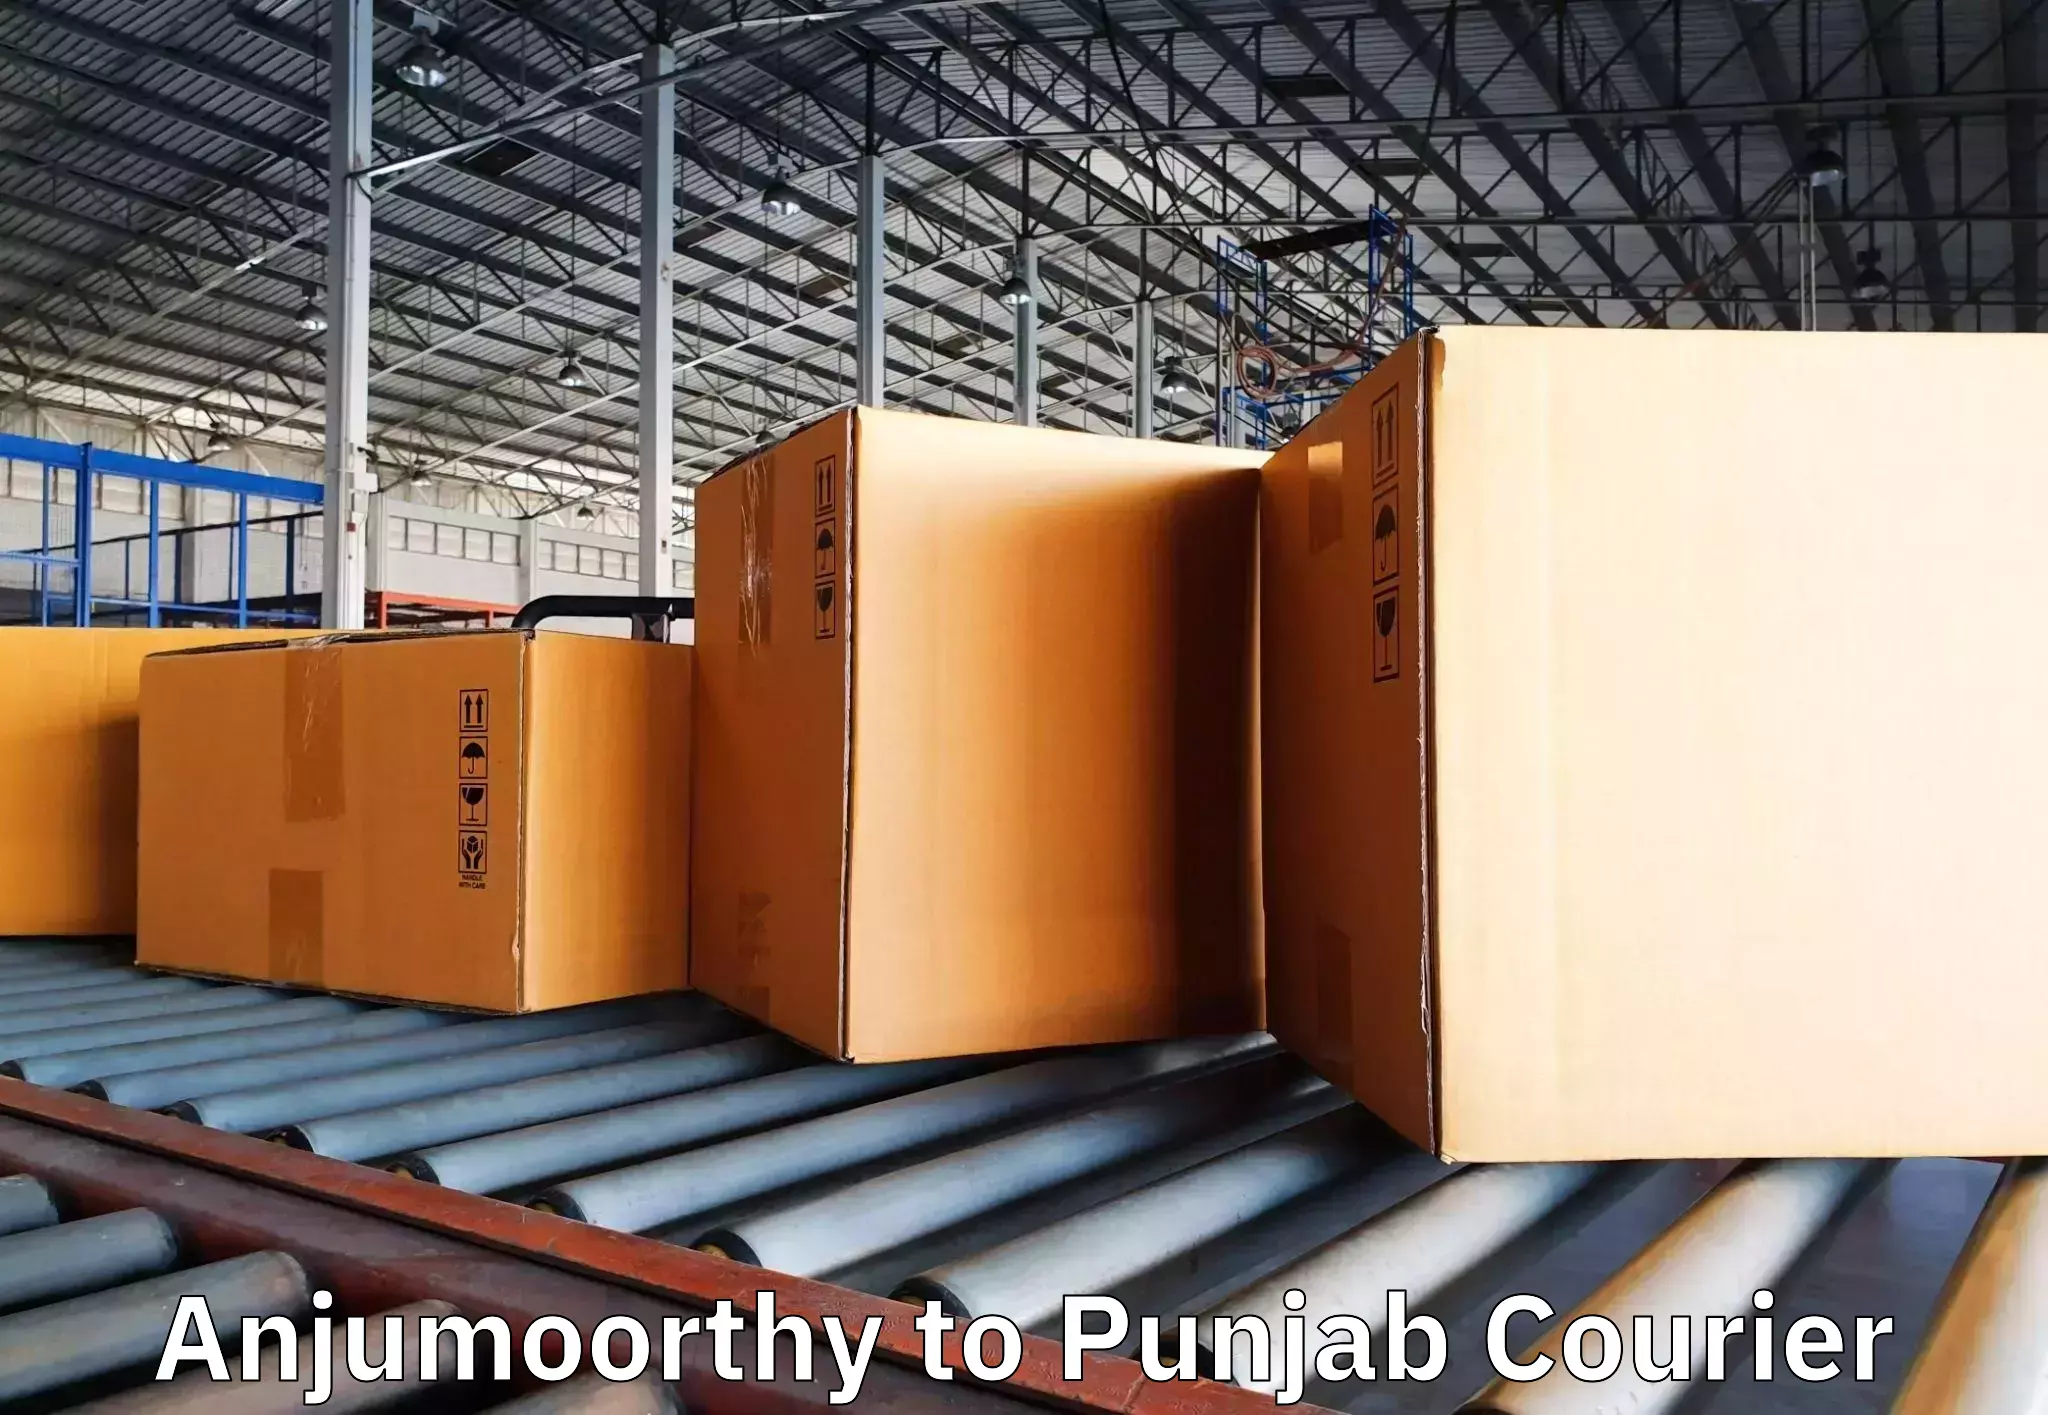 Efficient packing and moving in Anjumoorthy to Punjab